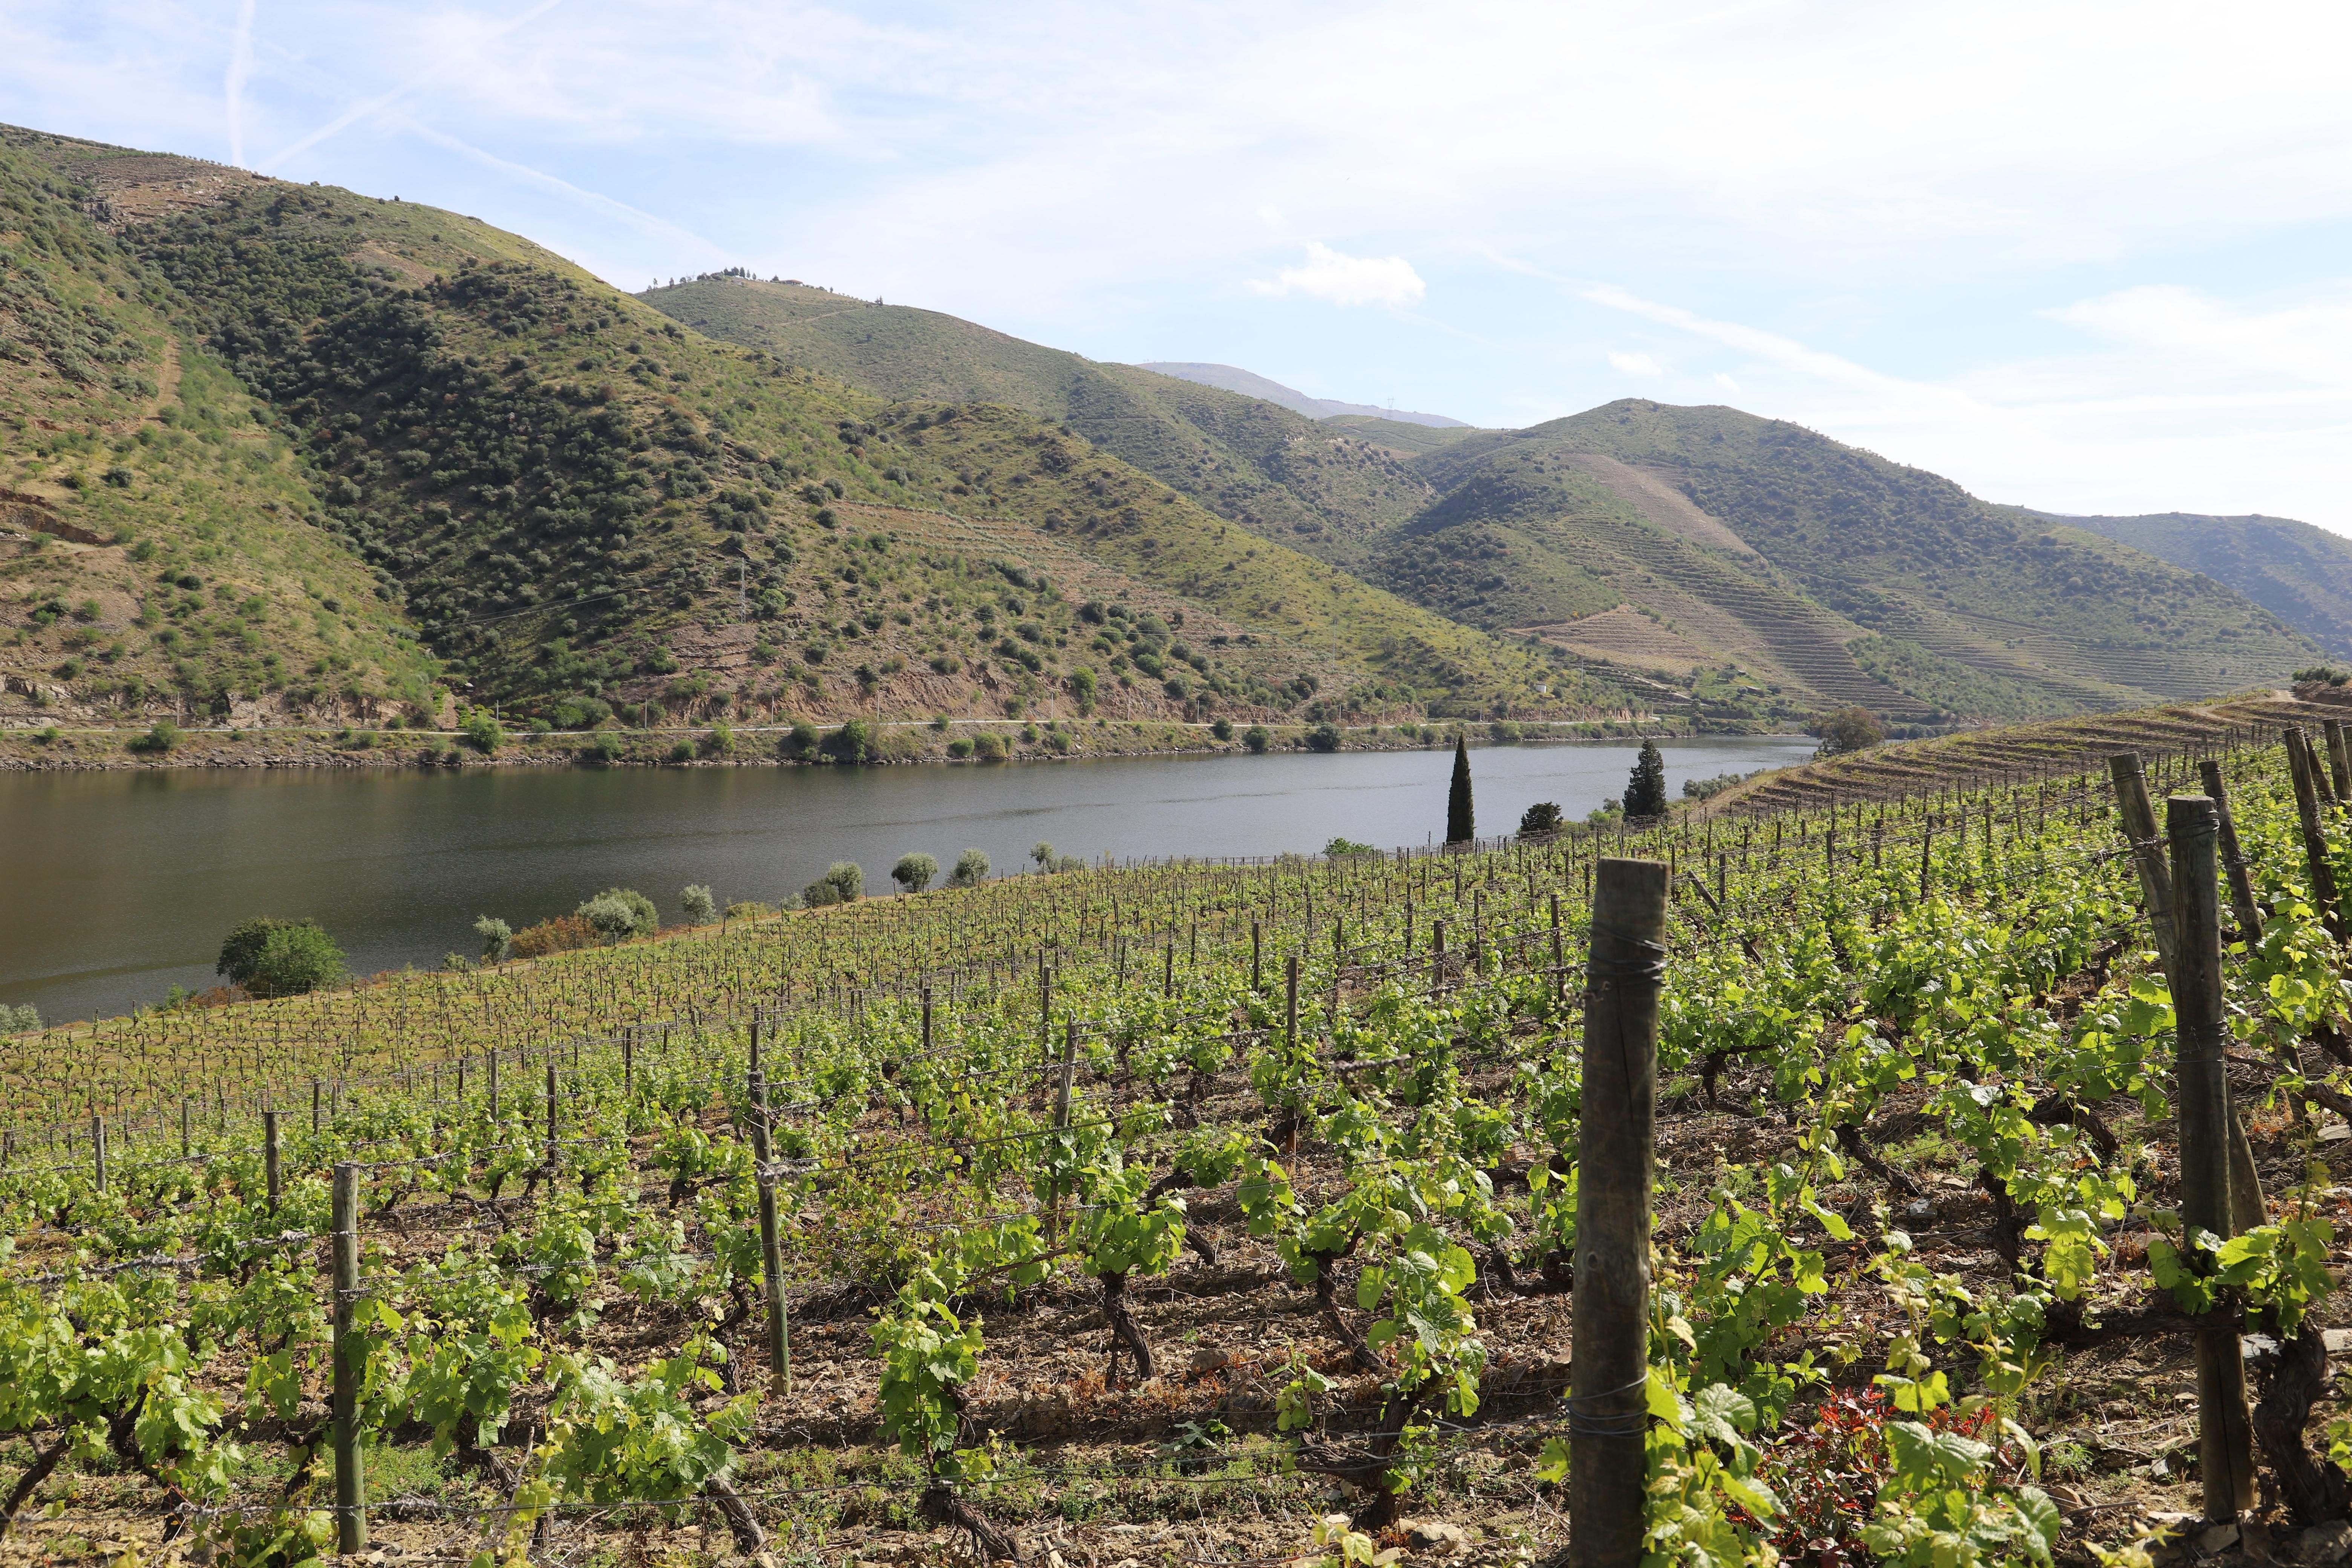 View of the vineyards and the Douro River